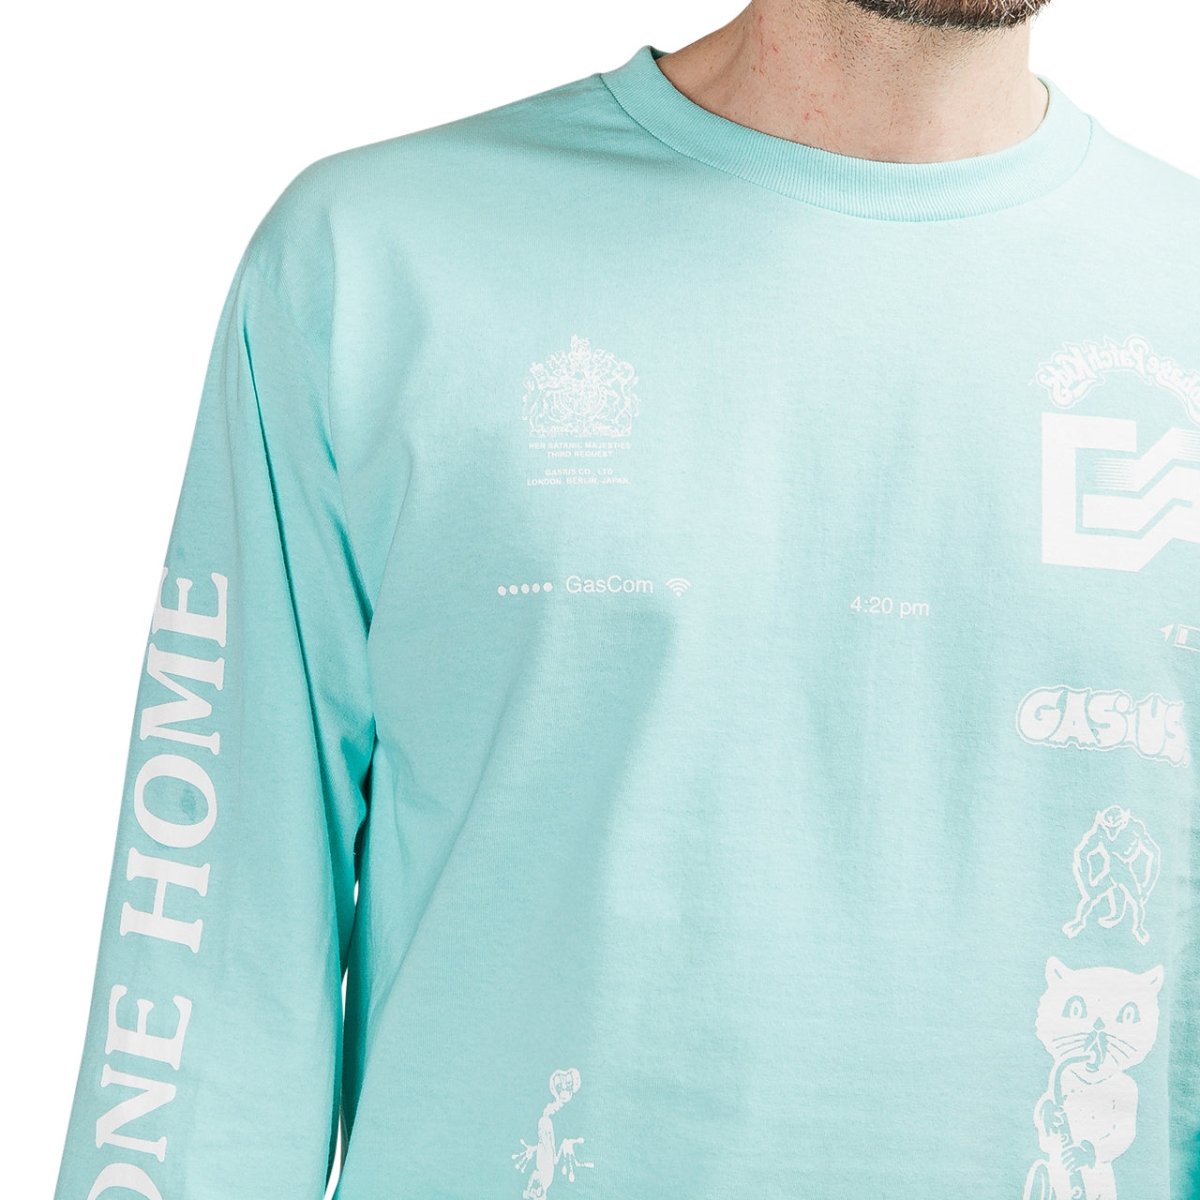 Gasius The Extra Gasius Longsleeve (Mint)  - Allike Store